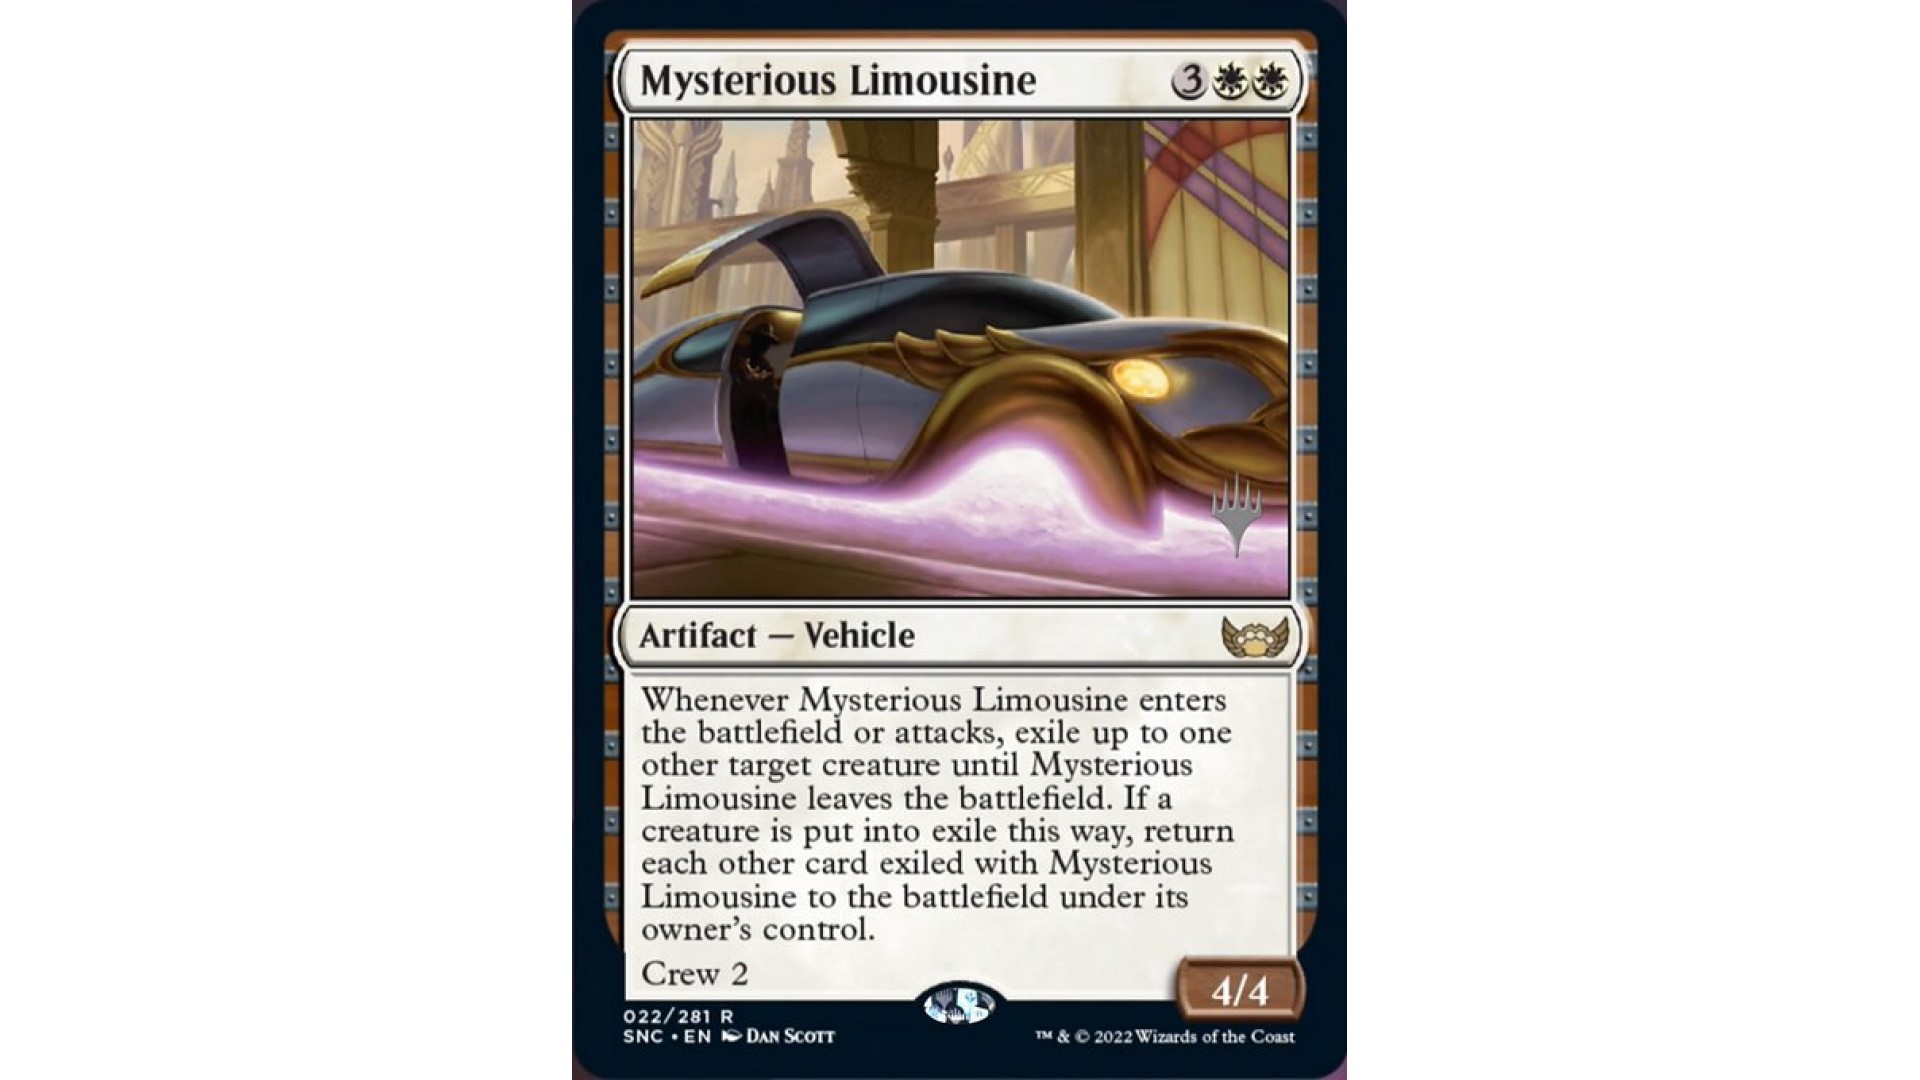 The MTG vehicle card Mysterious Limousine